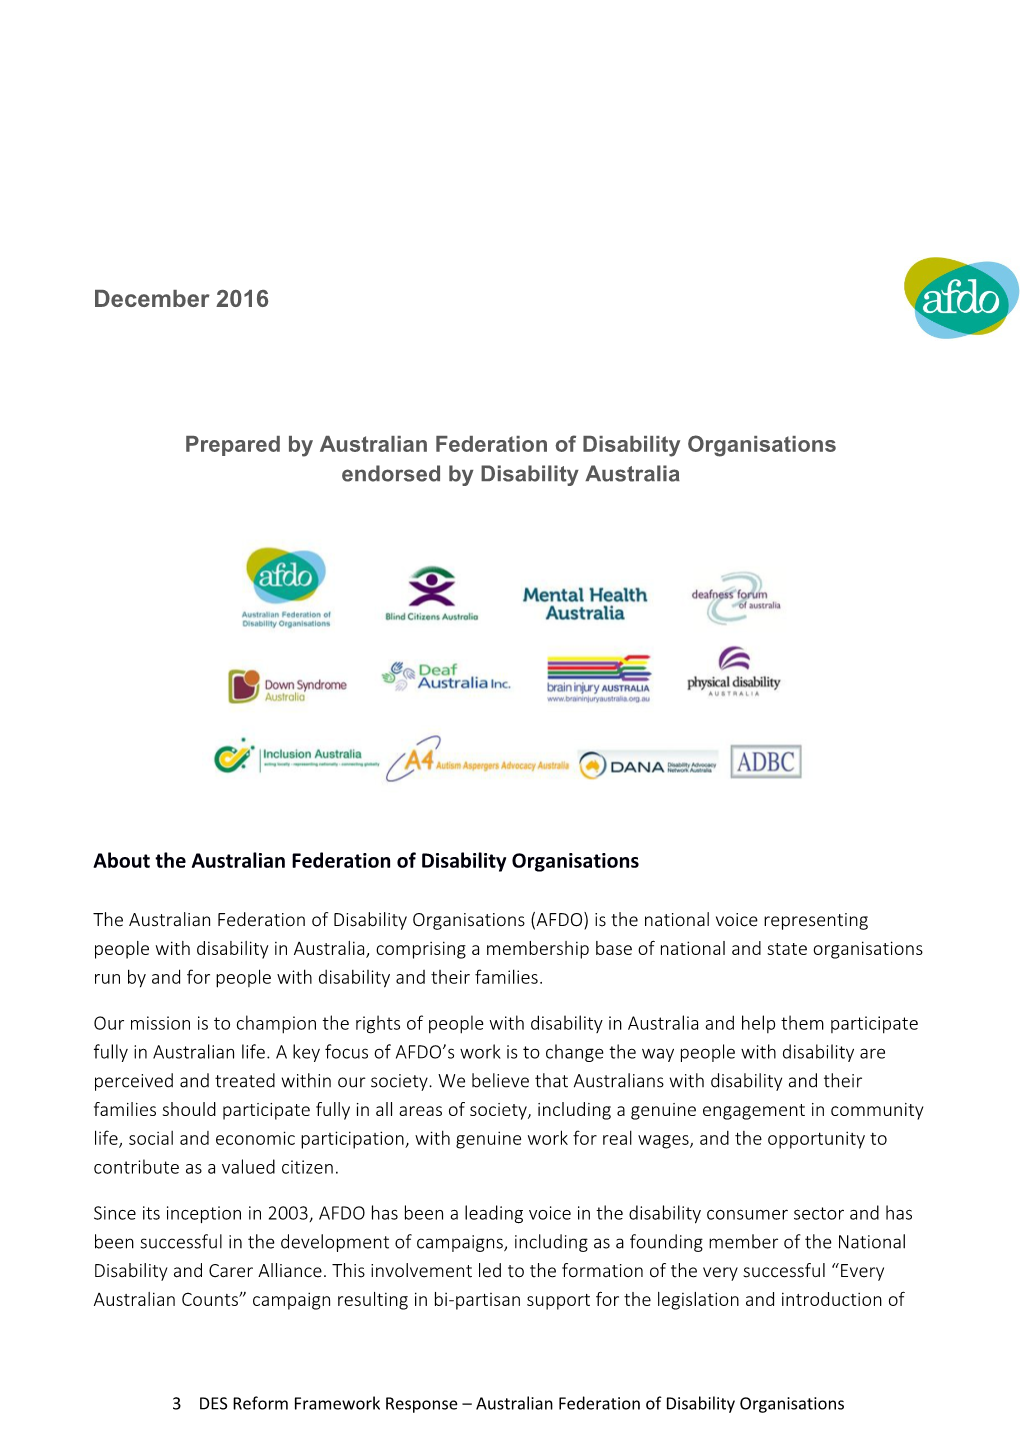 About the Australian Federation of Disability Organisations